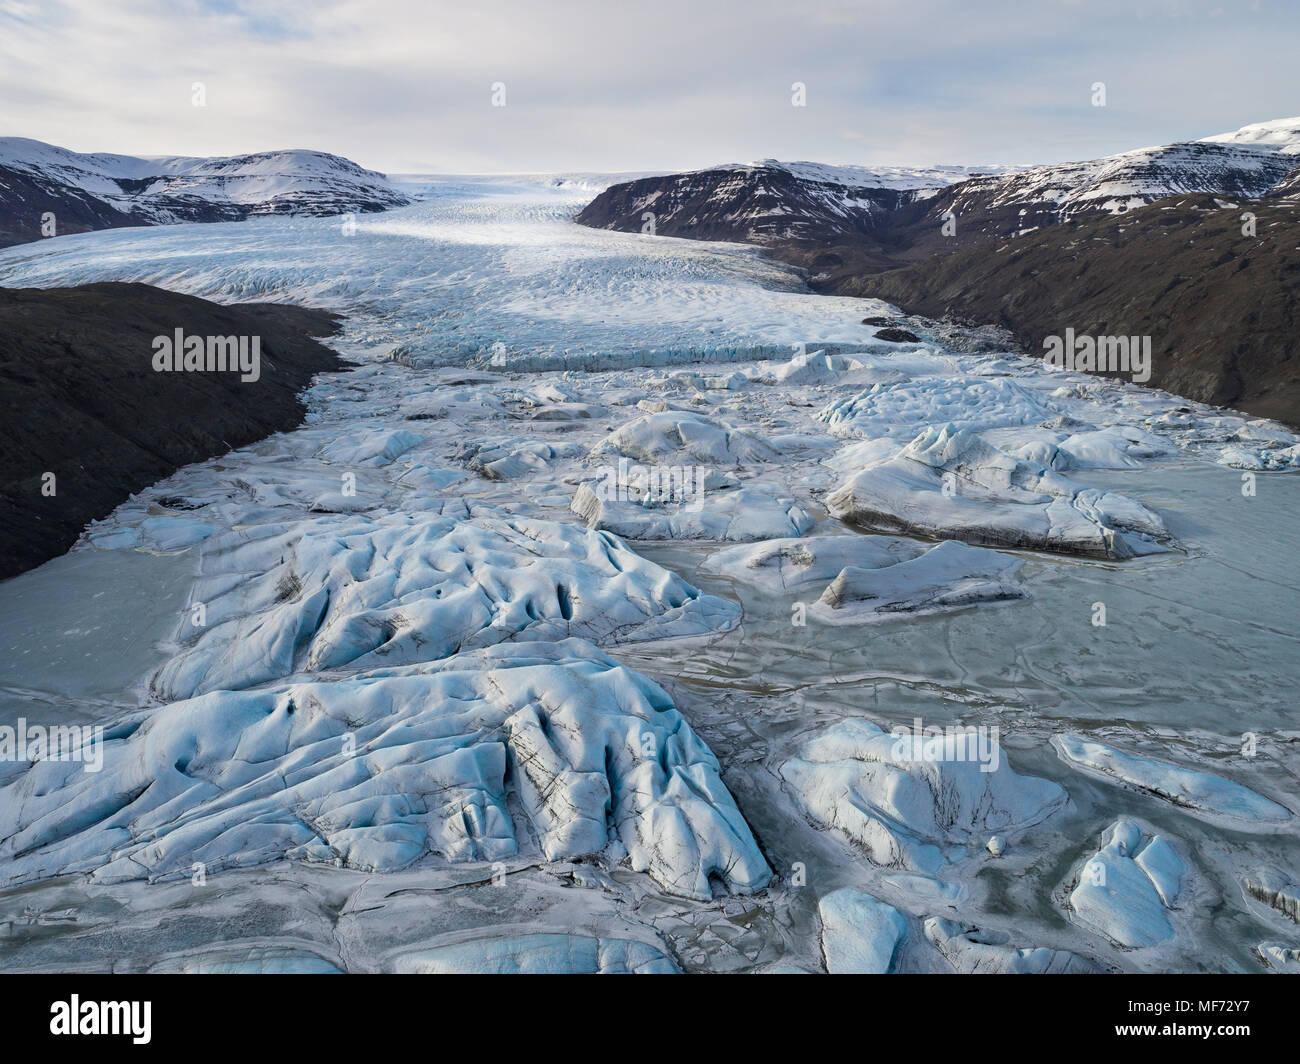 Aerial view of icebergs and glacier in Iceland Stock Photo